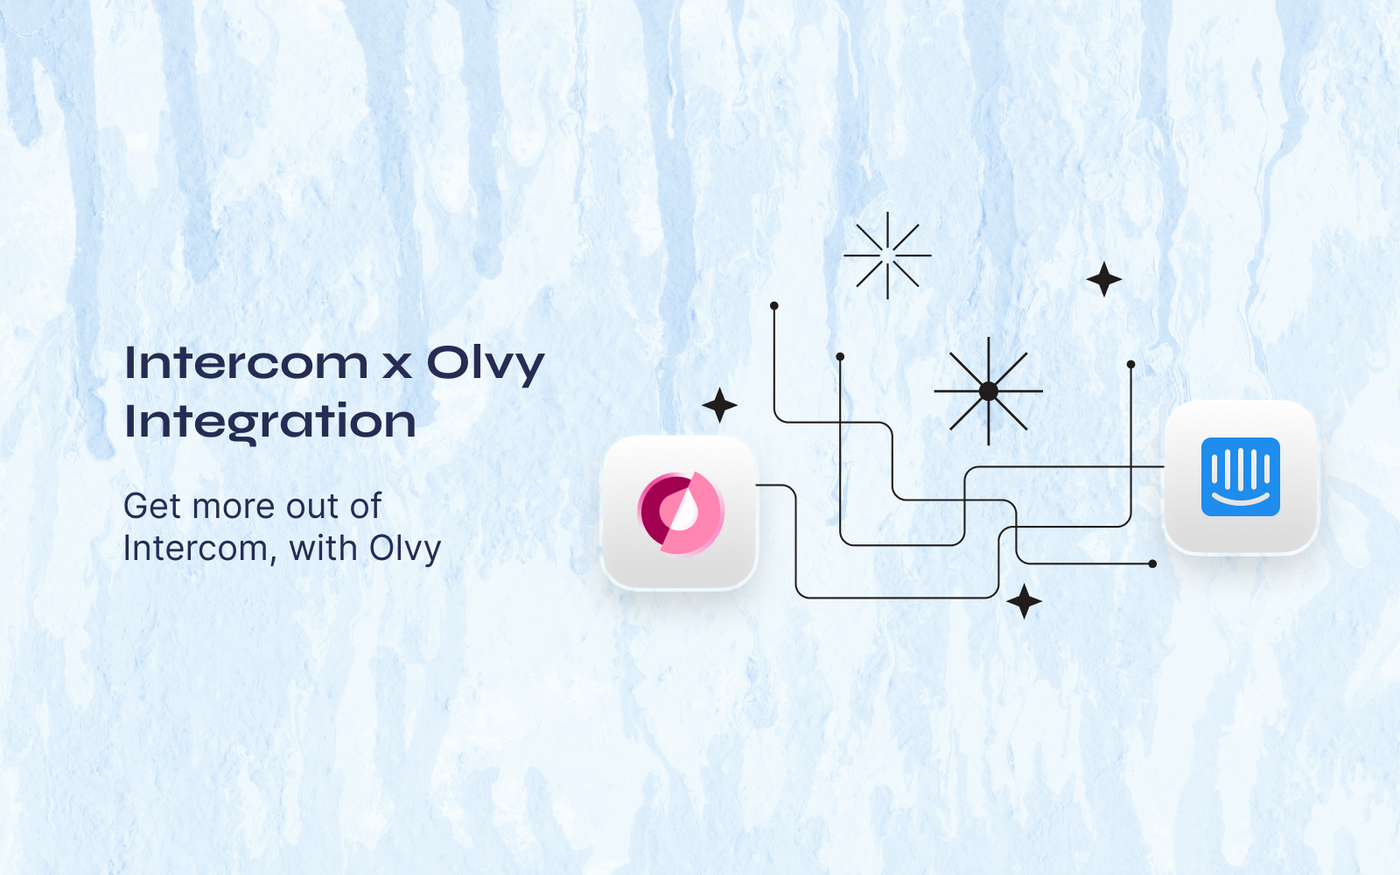 Collect and Analyze Feedback from Intercom <> Olvy